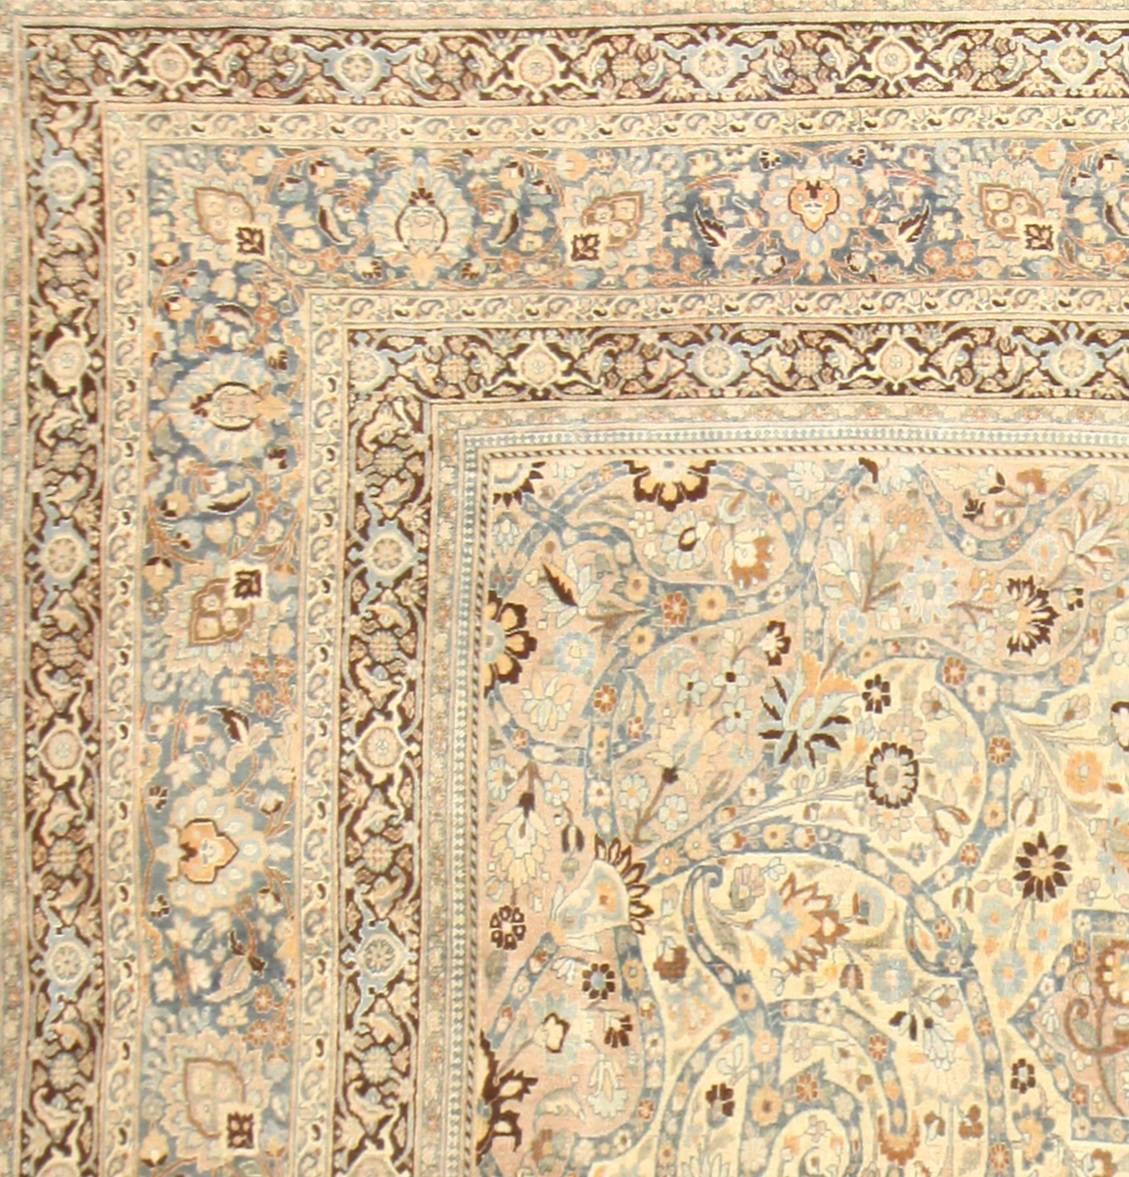 Antique Khorassan Rugs - The region of Khorassan in northeastern Persia has been famed for fine antique rugs going back to Timurid times in the late middle ages. In the later nineteenth and twentieth centuries Khorassan became a center for the